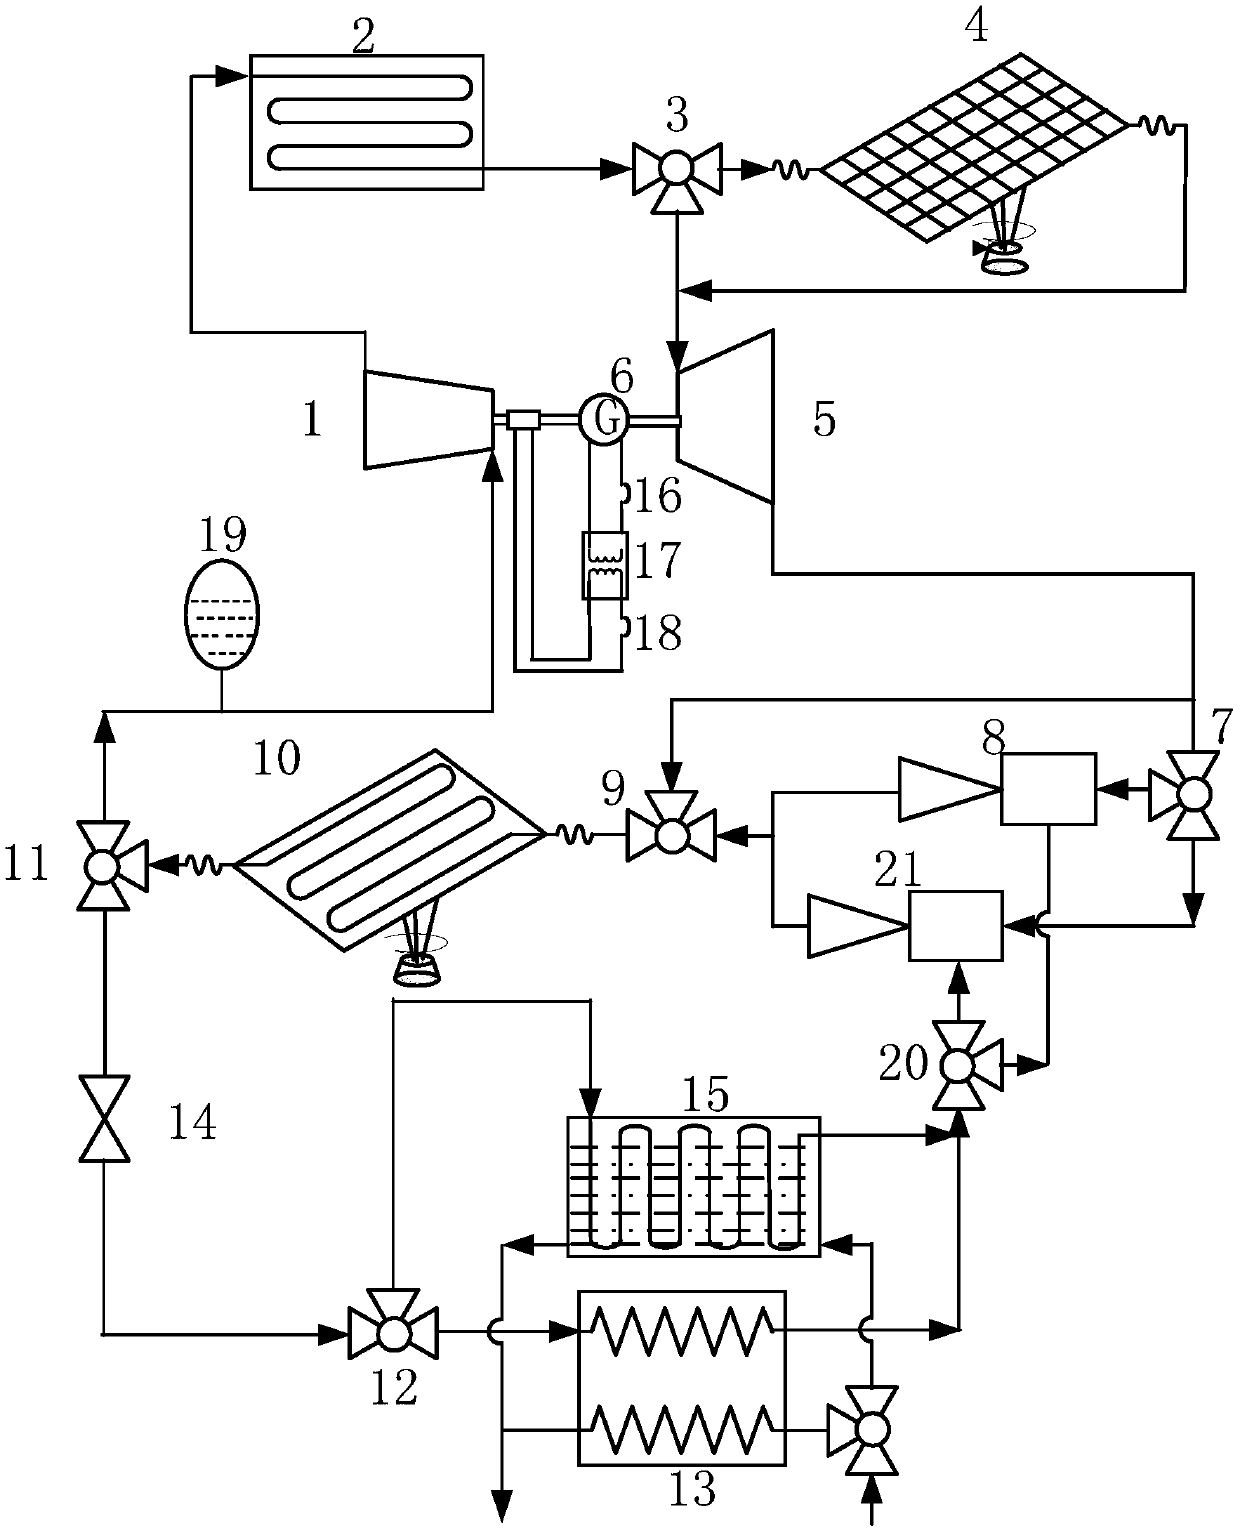 Self-circulating heat management and power generation system for lunar base